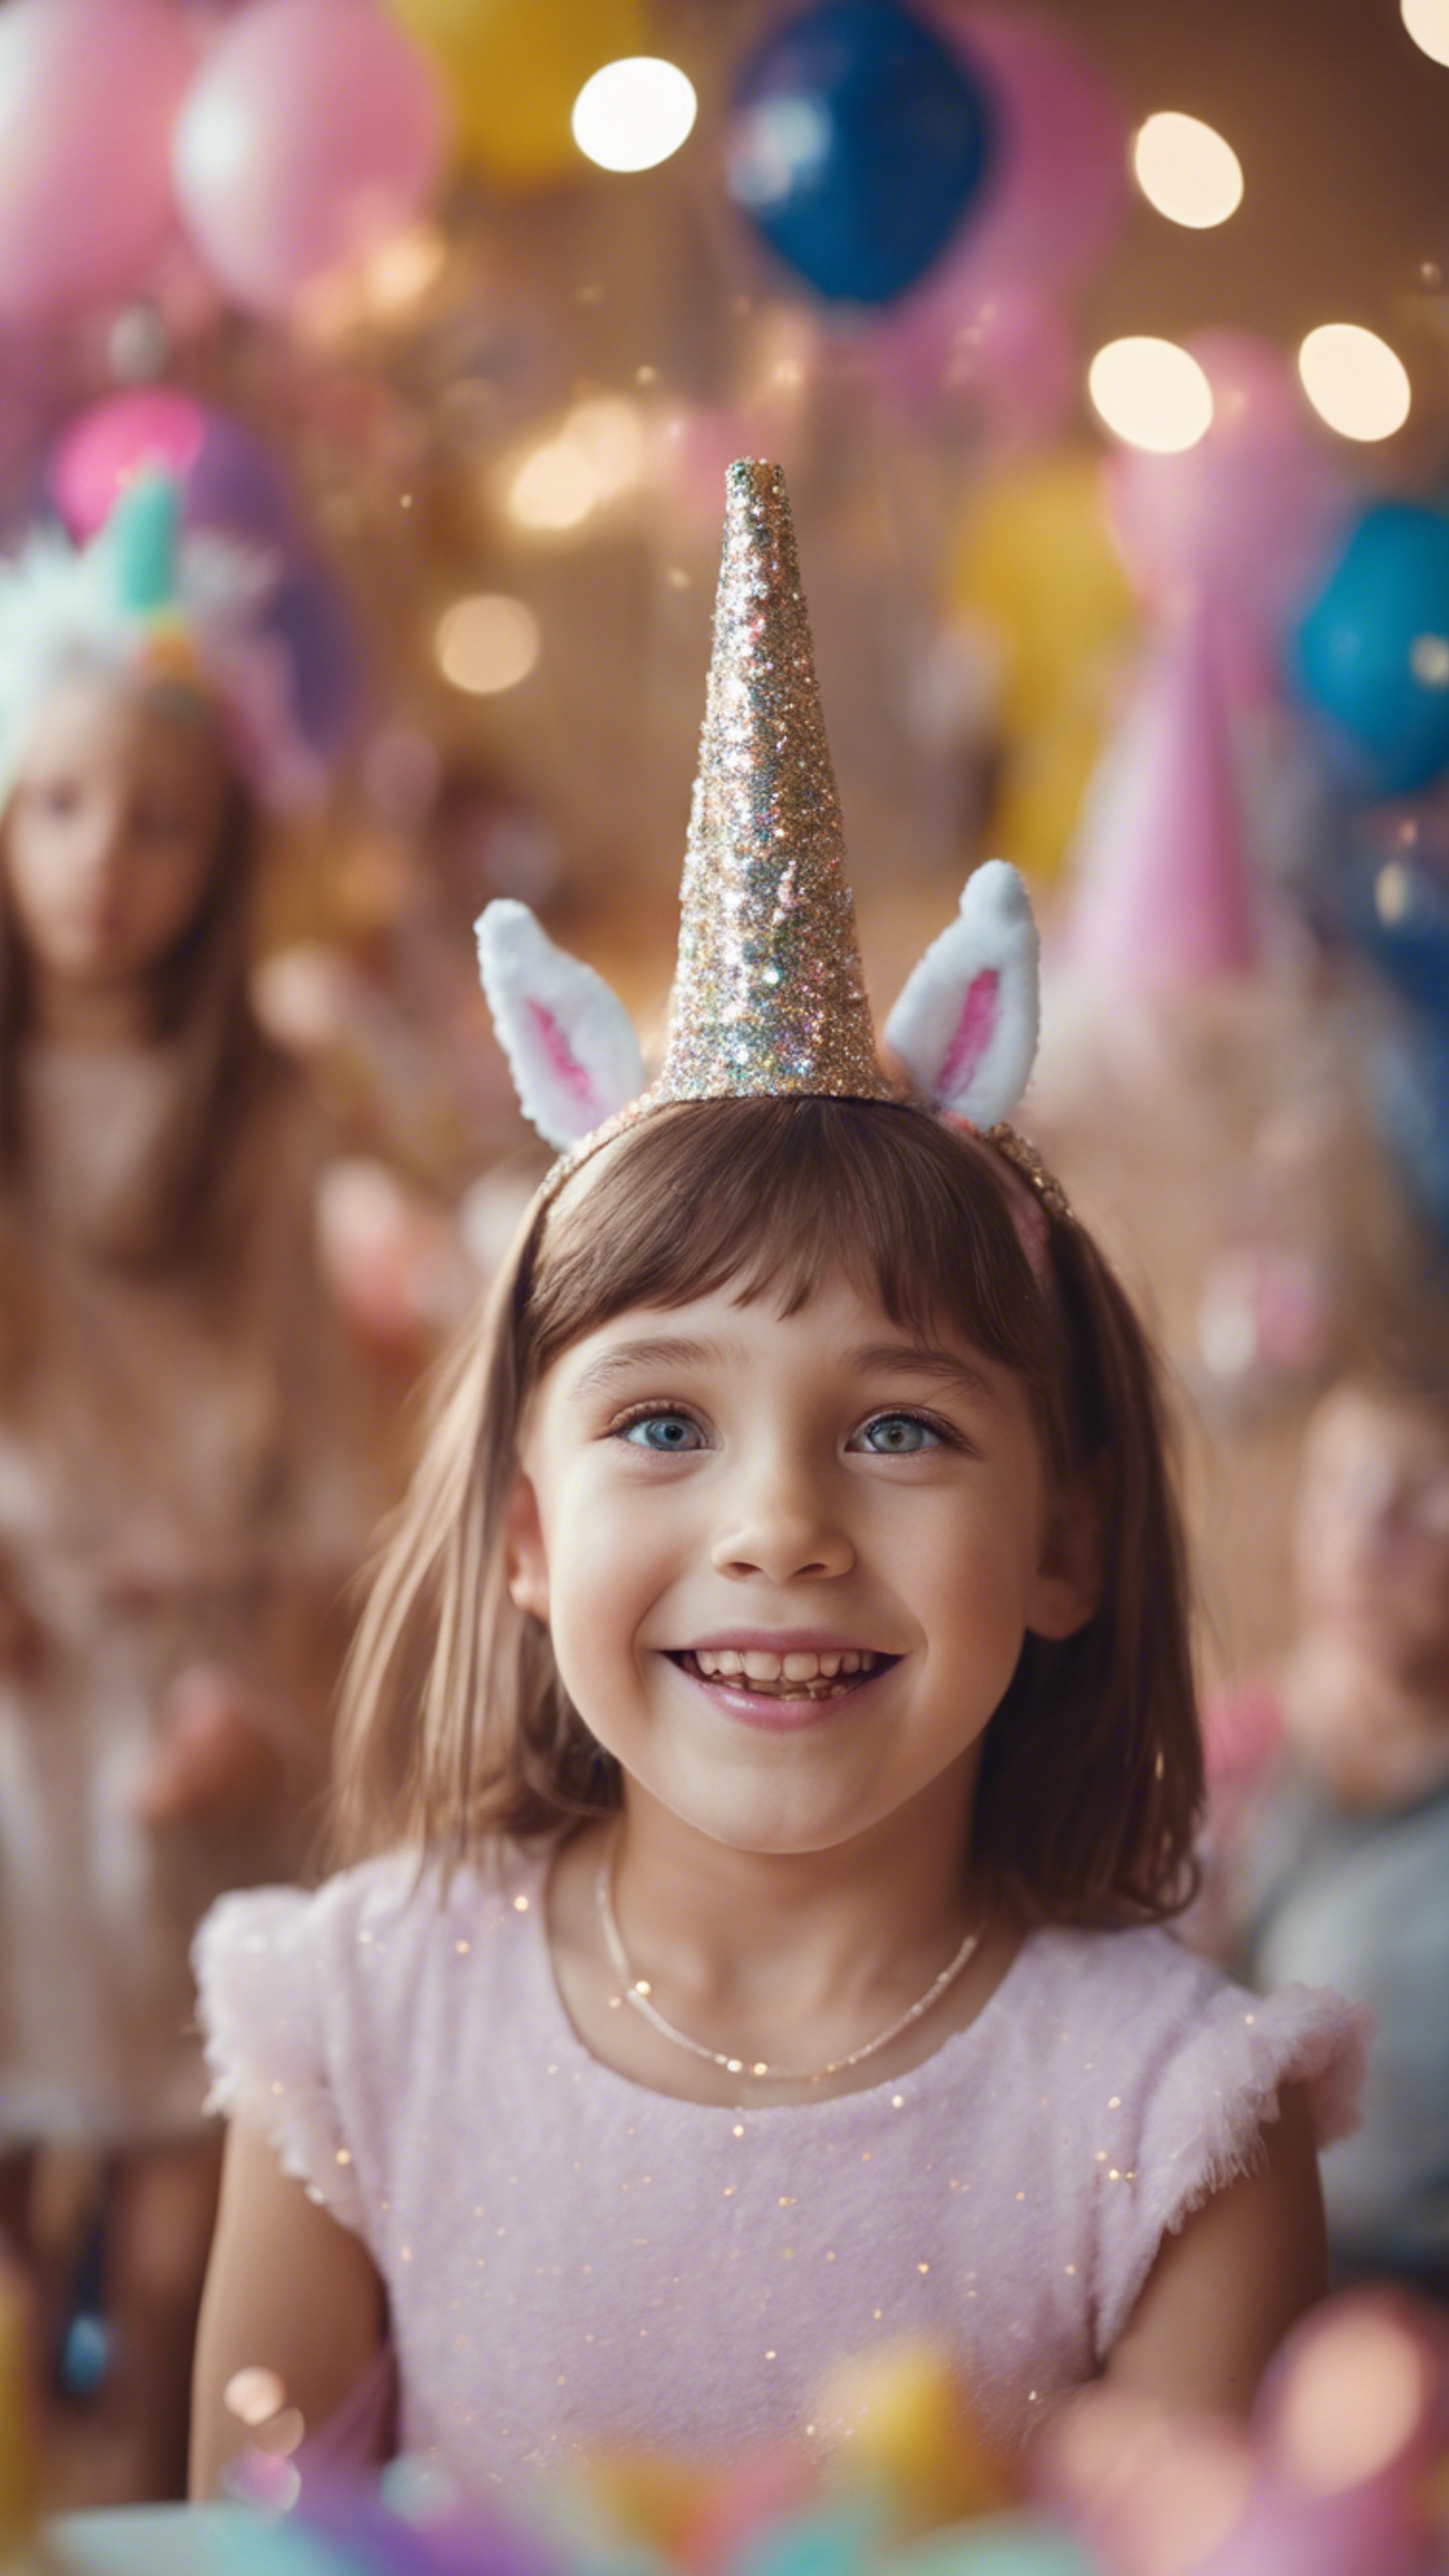 A young girl wearing a cute unicorn headband and shining with joy at her birthday party.壁紙[40be368353f74b5c94ef]